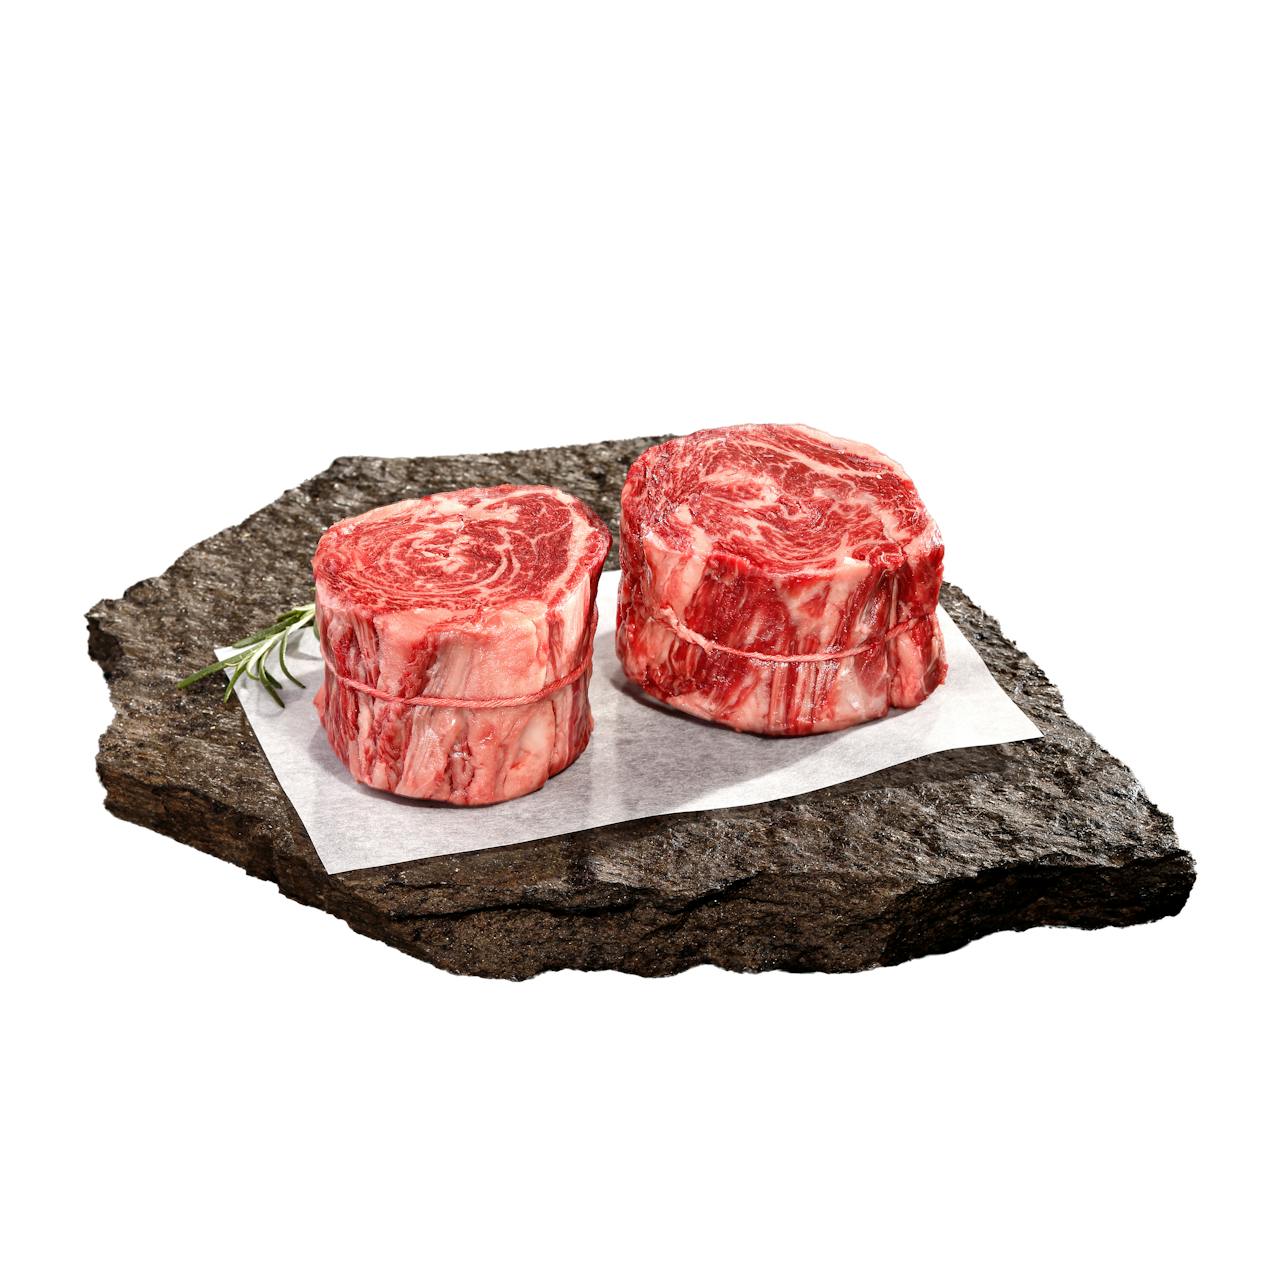 Snake River Farms American Wagyu Rolled Cap of Ribeye - 2 Pack